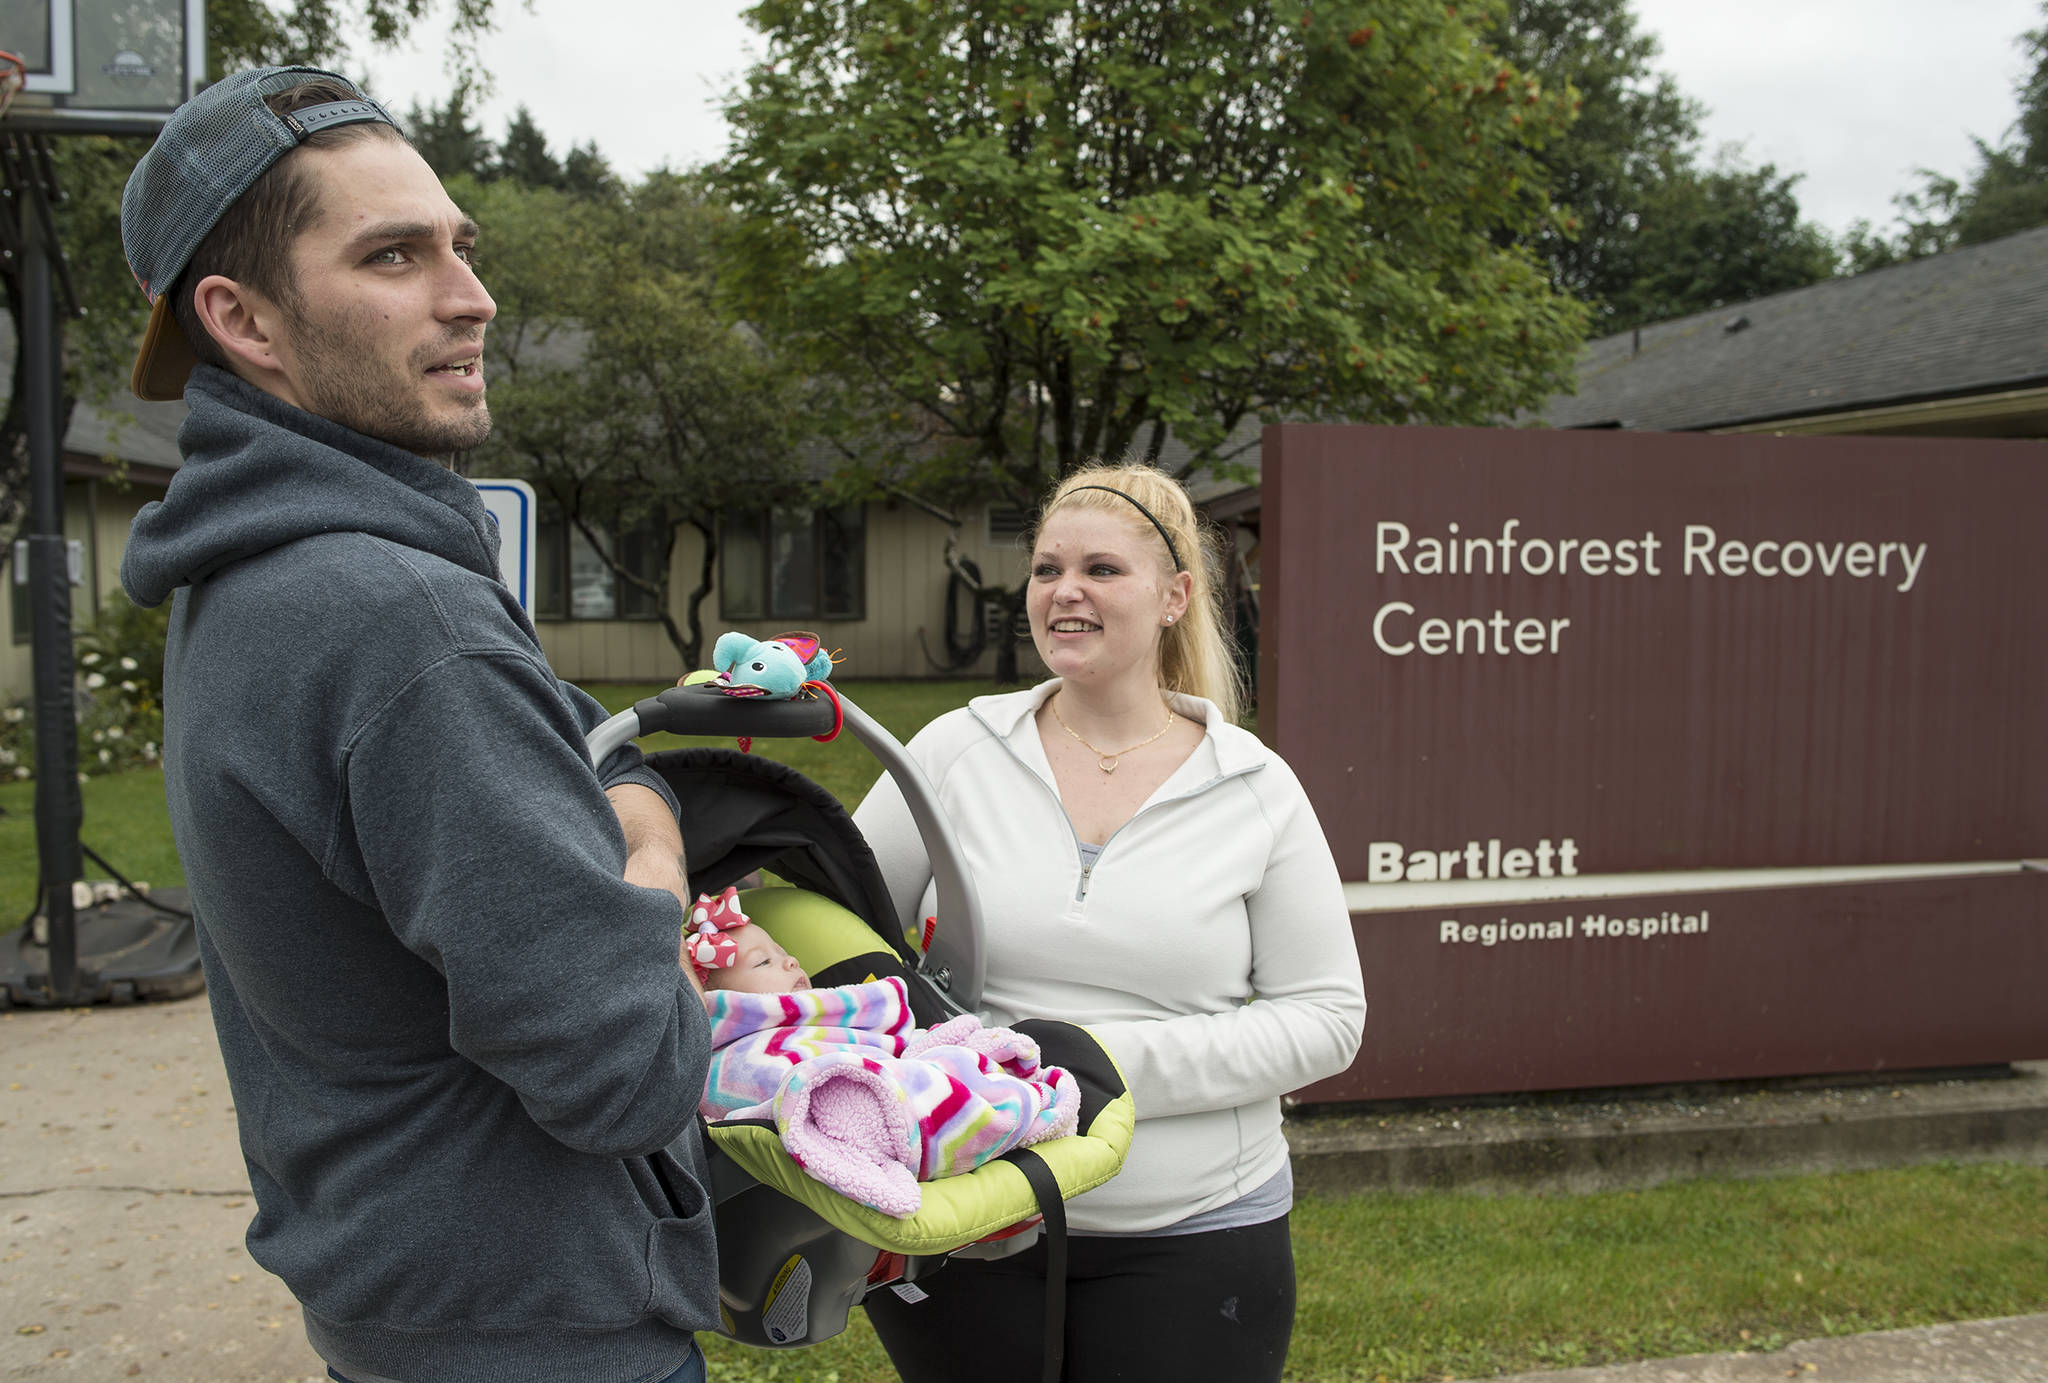 Nick Waterhouse and girlfriend Meagan Dayton say their baby daughter Brooklynn is the reason for kicking their opioid habit. They talked about their addition and using the Rainforest Recovery Center’s outpatient program to kick their habit on Wednesday, Aug. 23, 2017. (Michael Penn | Juneau Empire)